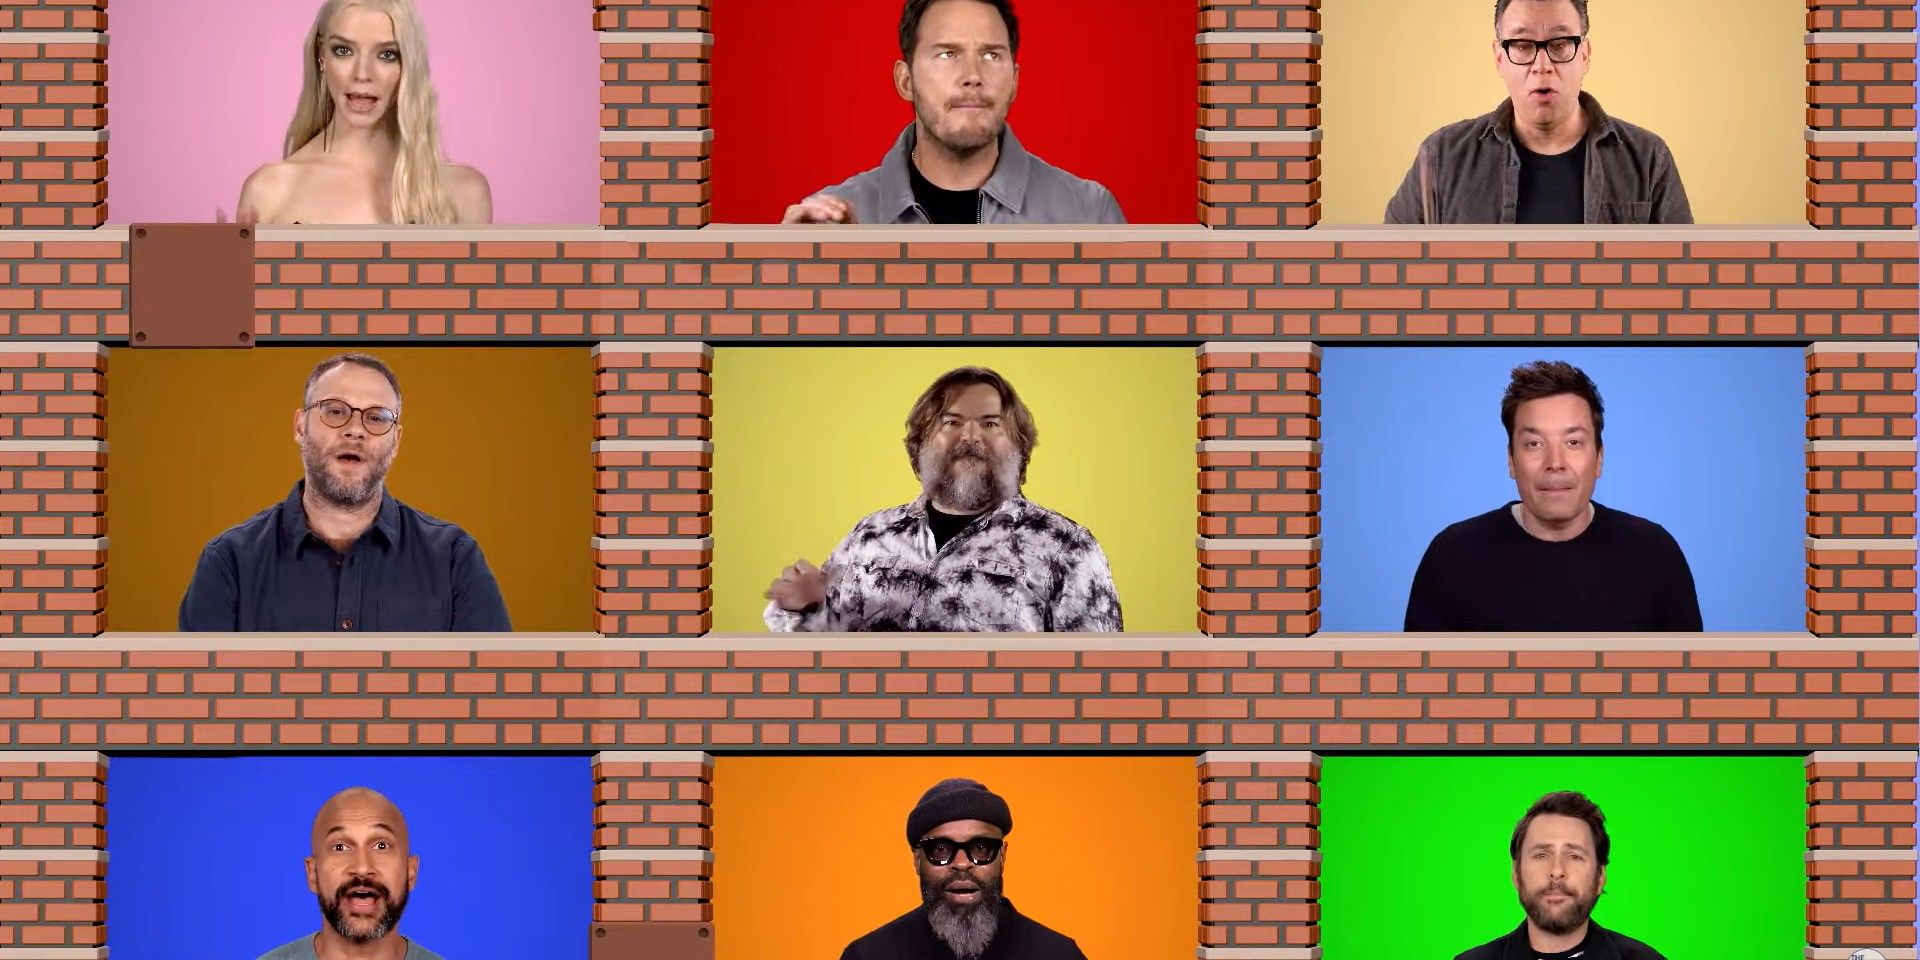 Super Mario Bros cast since the theme song in each individual box